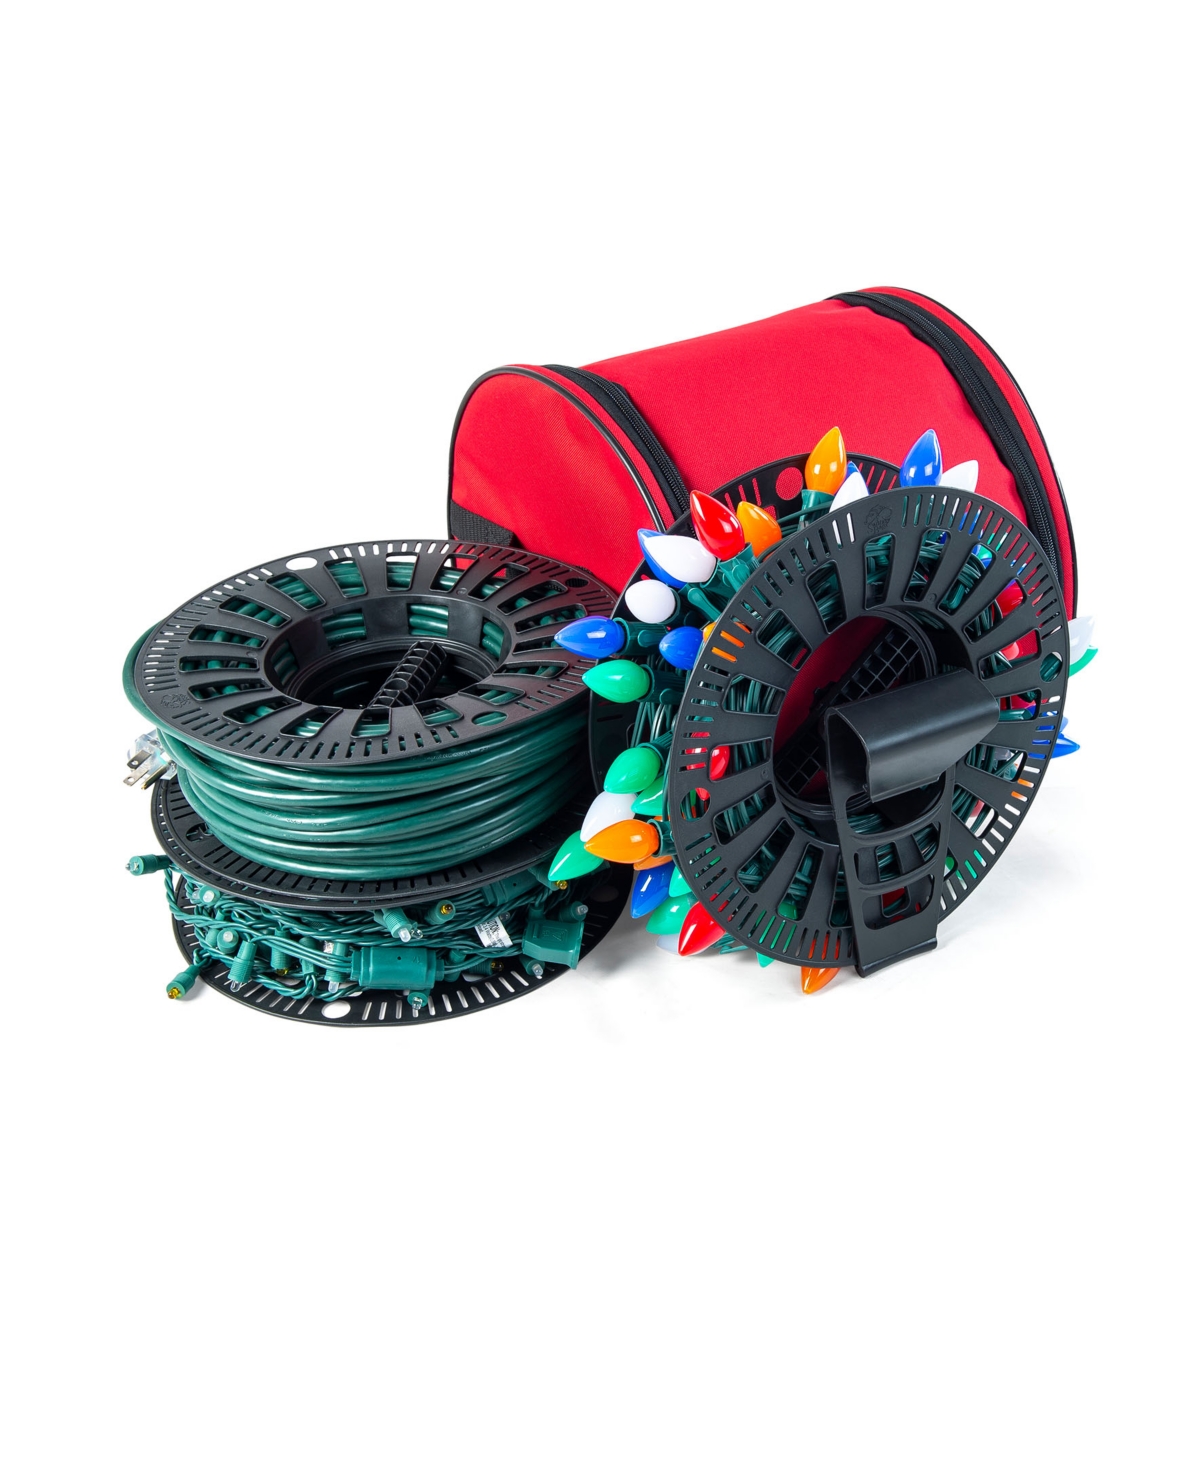 Christmas Light Storage Reels and Organizer - Red